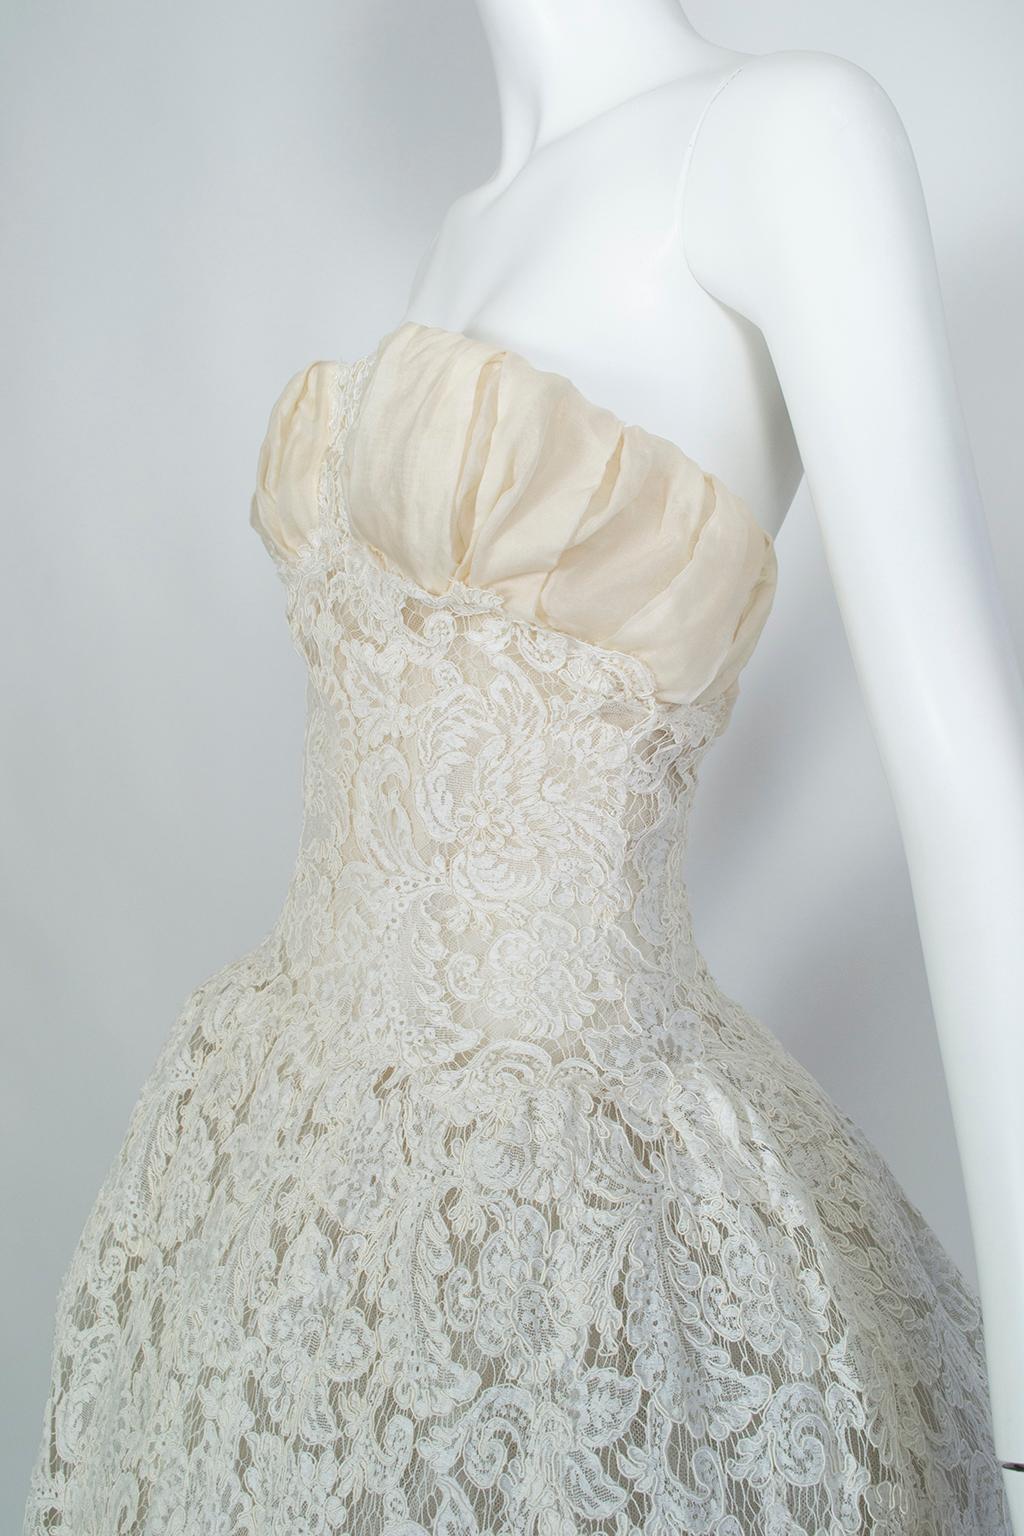 Strapless Ivory Guipure Lace Corseted Robe Française Wedding Dress - XS, 1950s 1